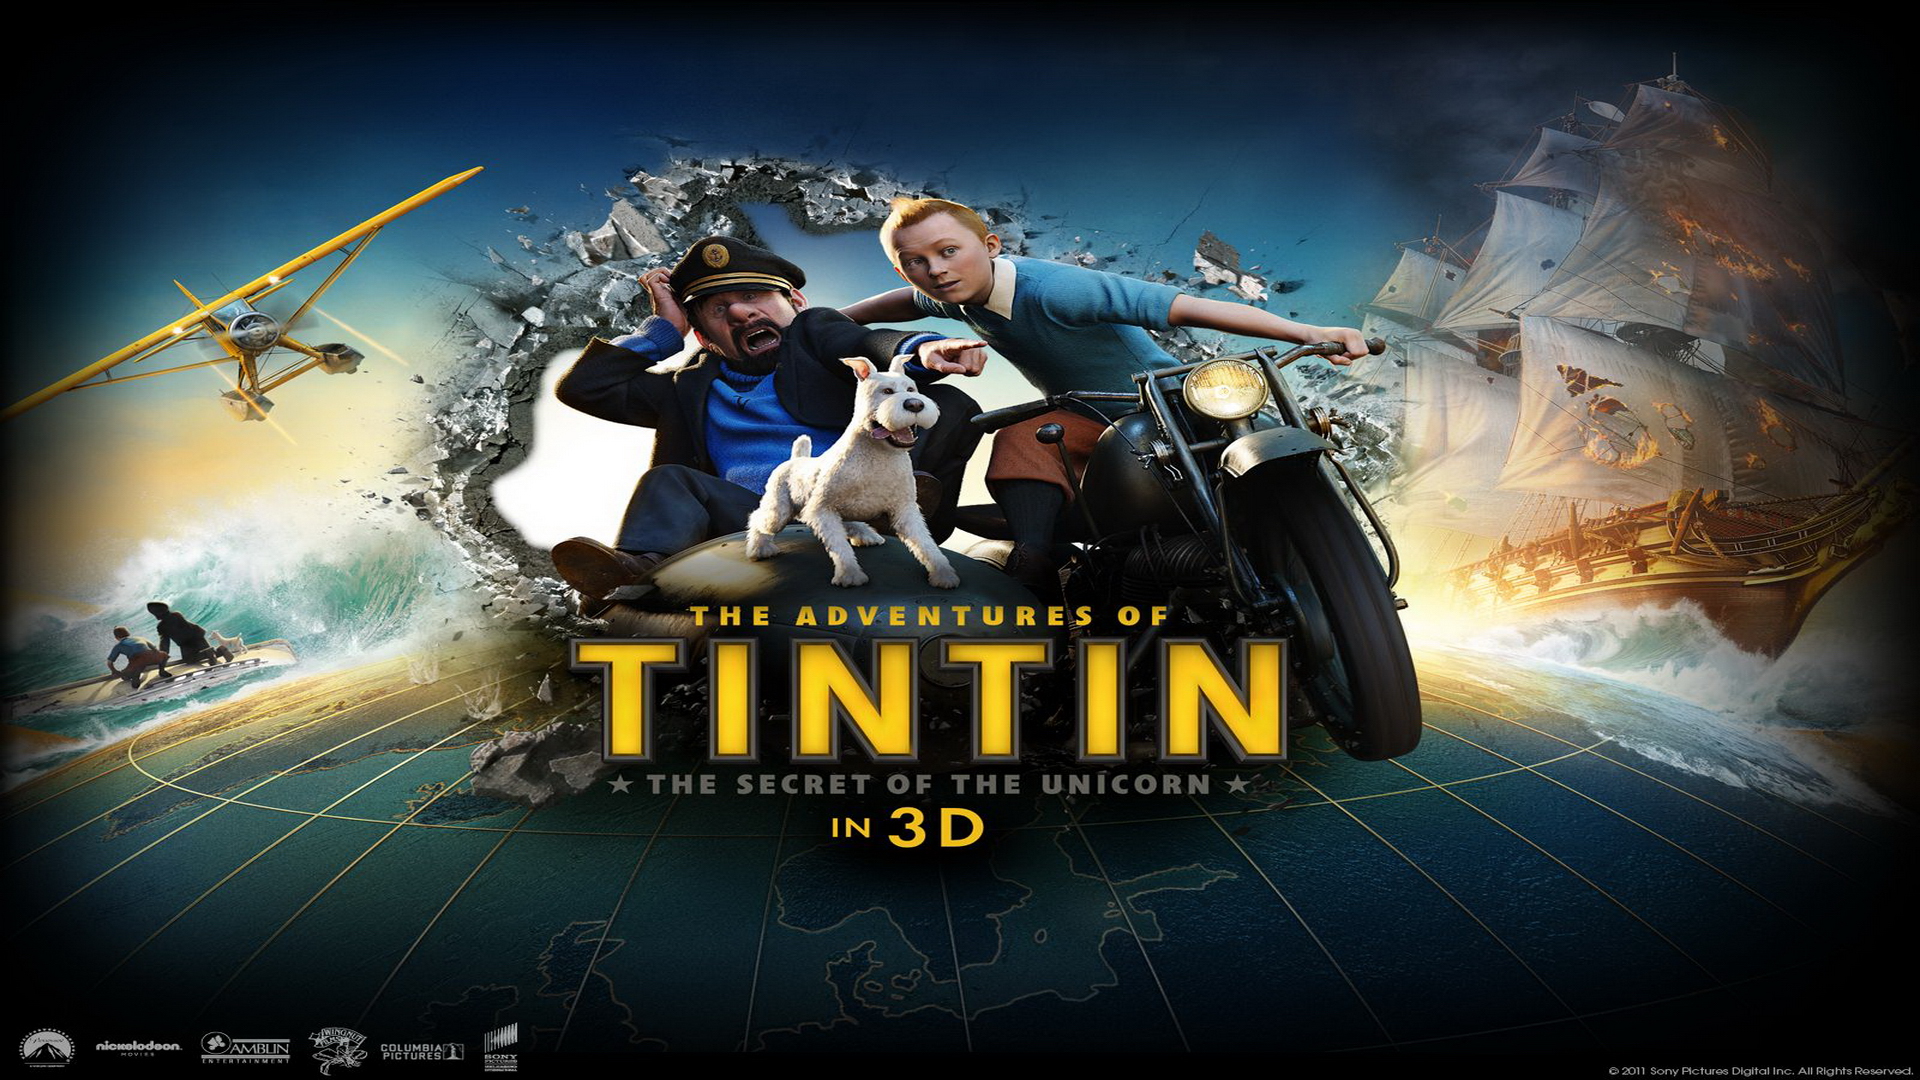 Free download the adventures of tintin wallpapers hd movie wallpapers x x for your desktop mobile tablet explore the adventures of tintin wallpaper tintin wallpaper the lord of